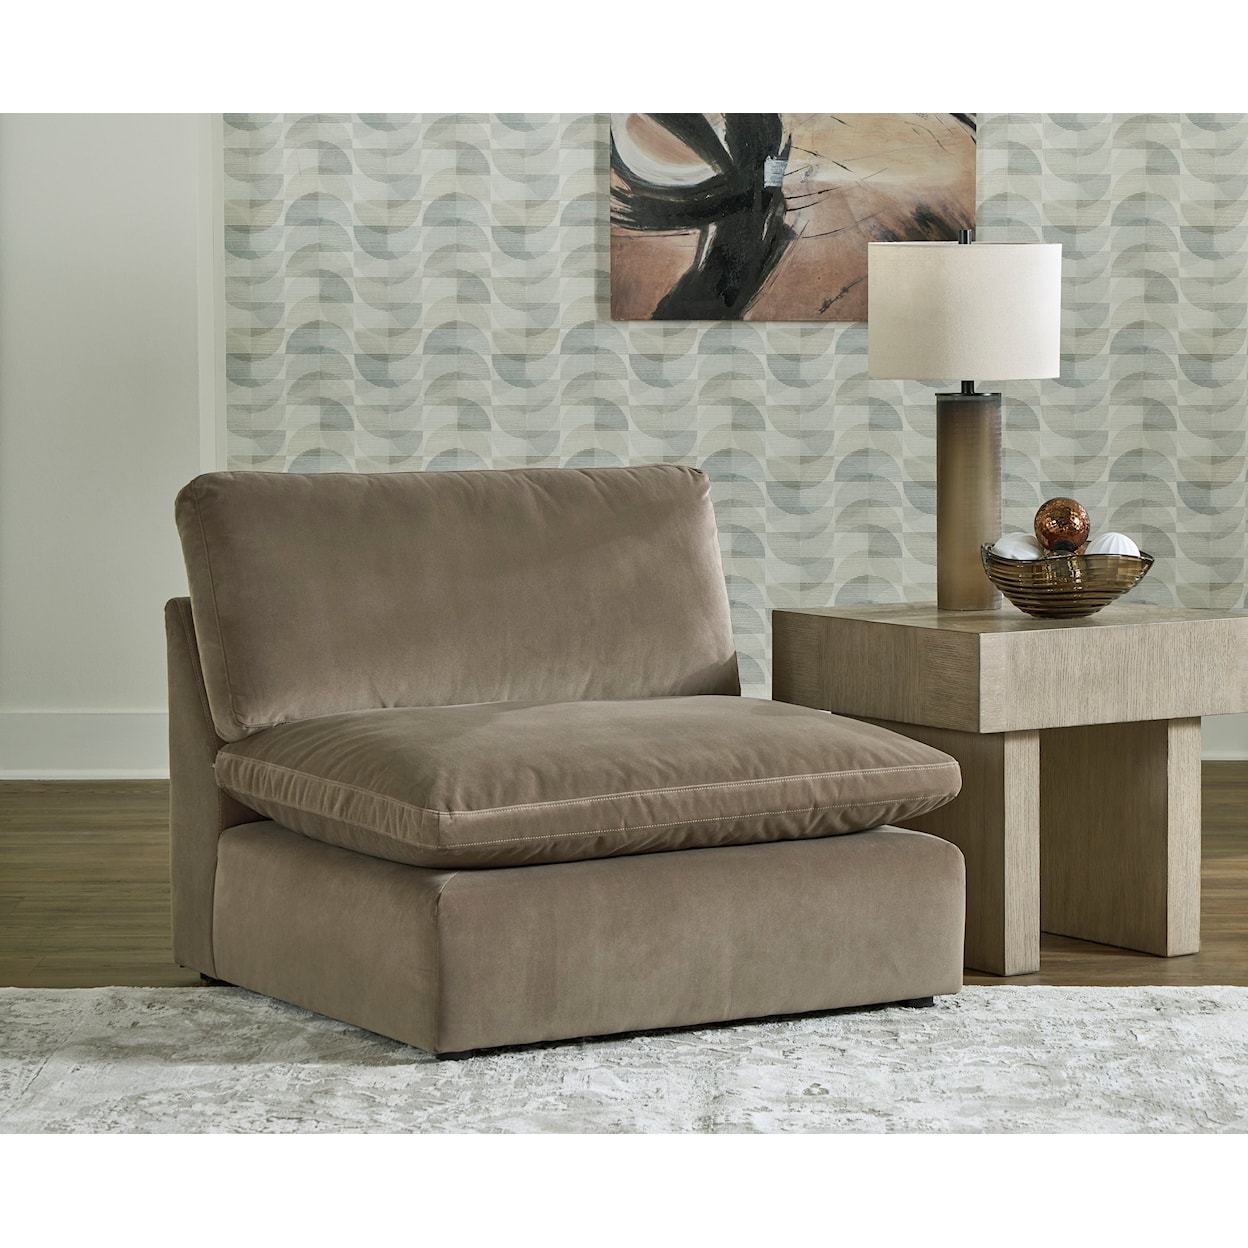 StyleLine Sophie Armless Chair